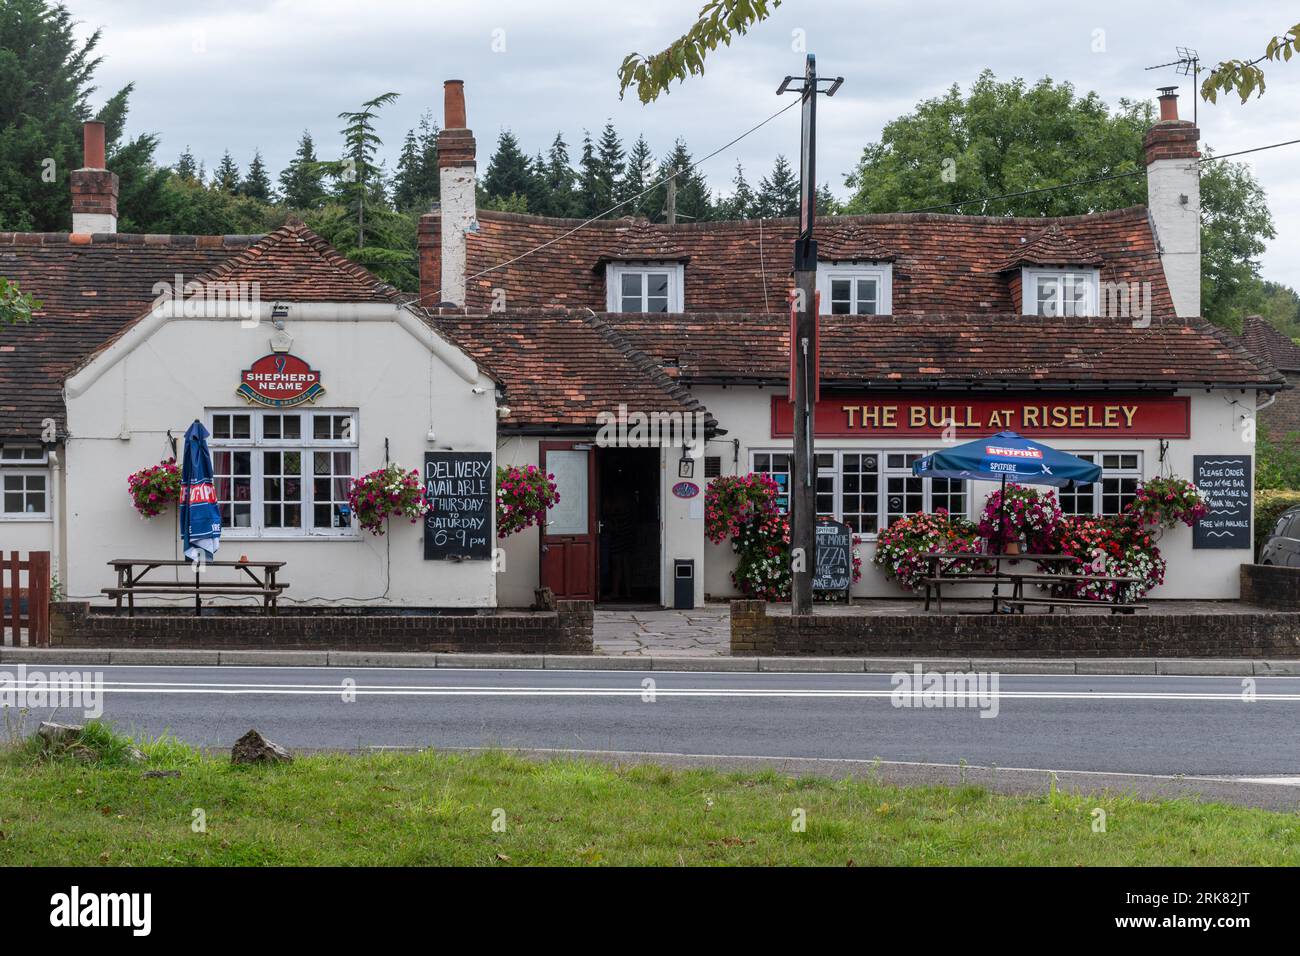 The Bull at Riseley, a Shepherd Neame pub in the village of Riseley on the Berkshire Hampshire border, England, UK Stock Photo